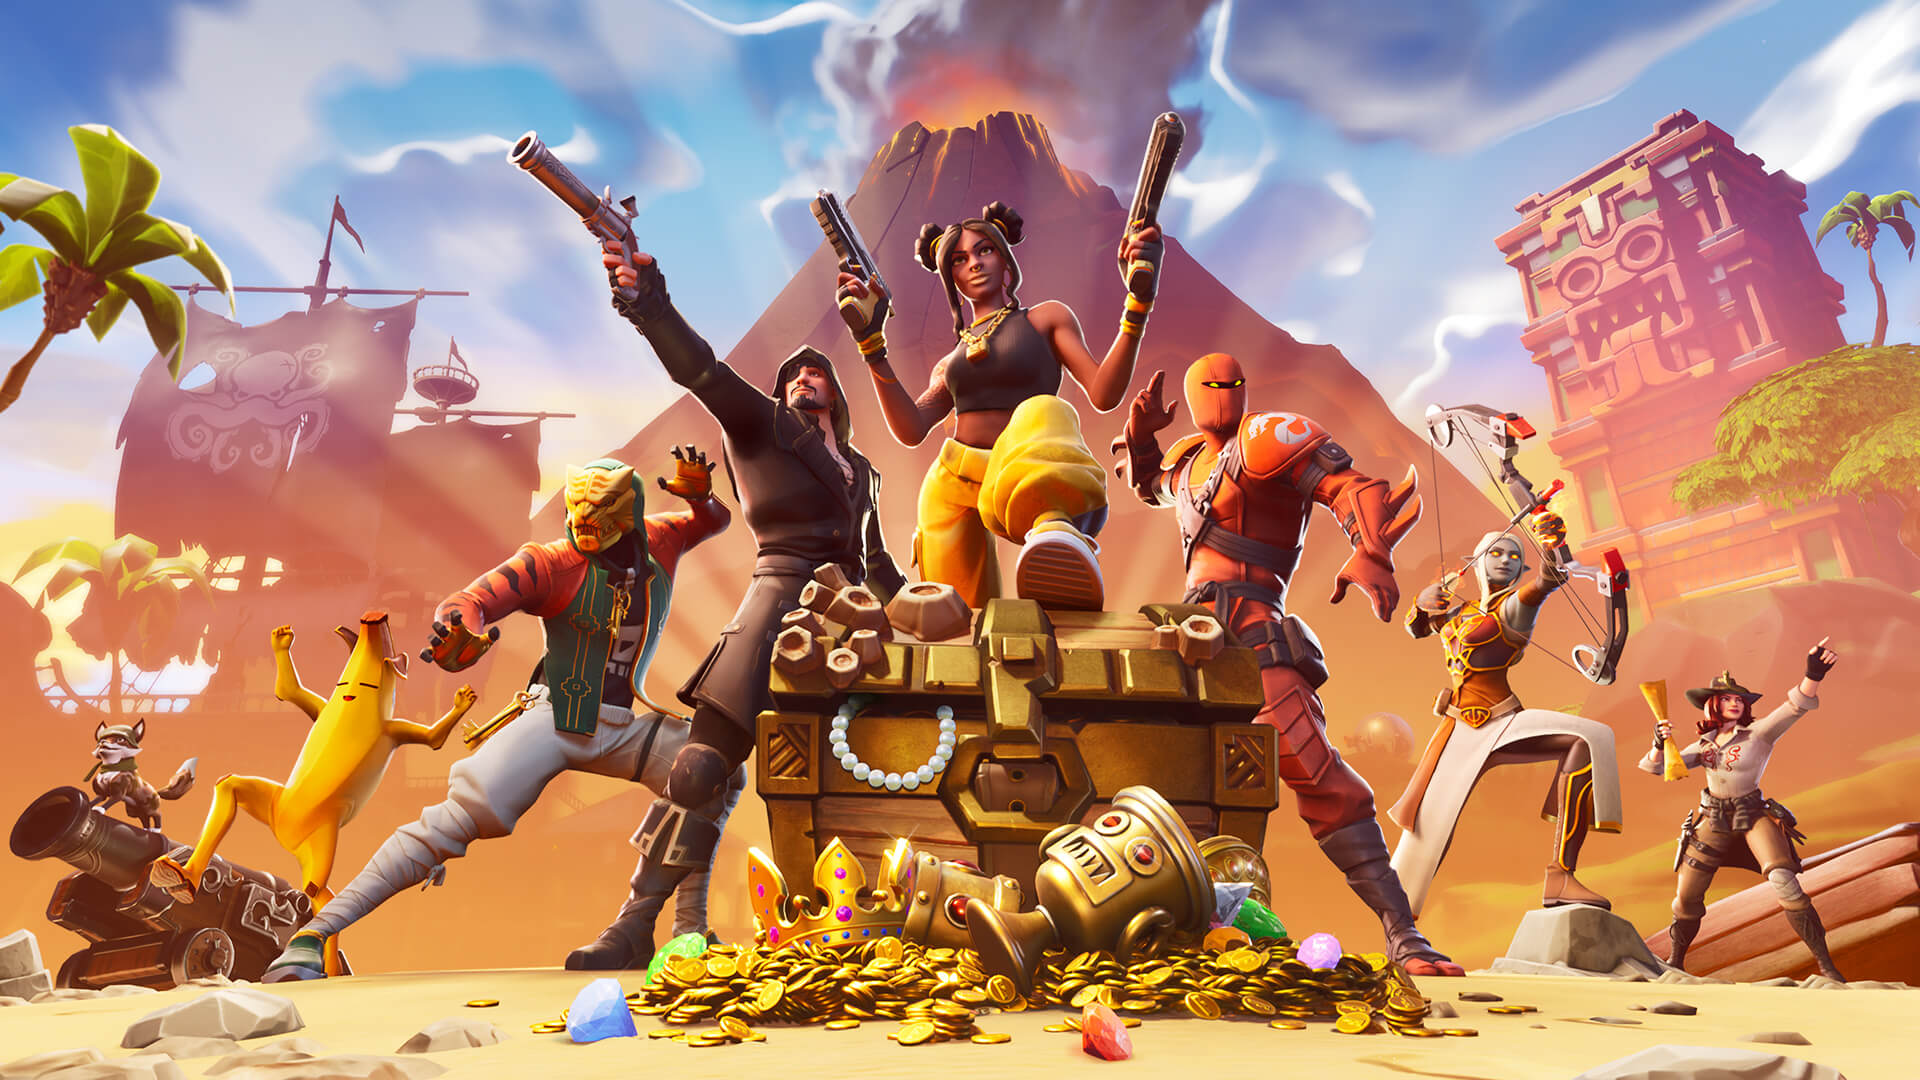 Epic Games Brings Fortnite Event For Seven Days; Fans Look Forward To Completing Challenges